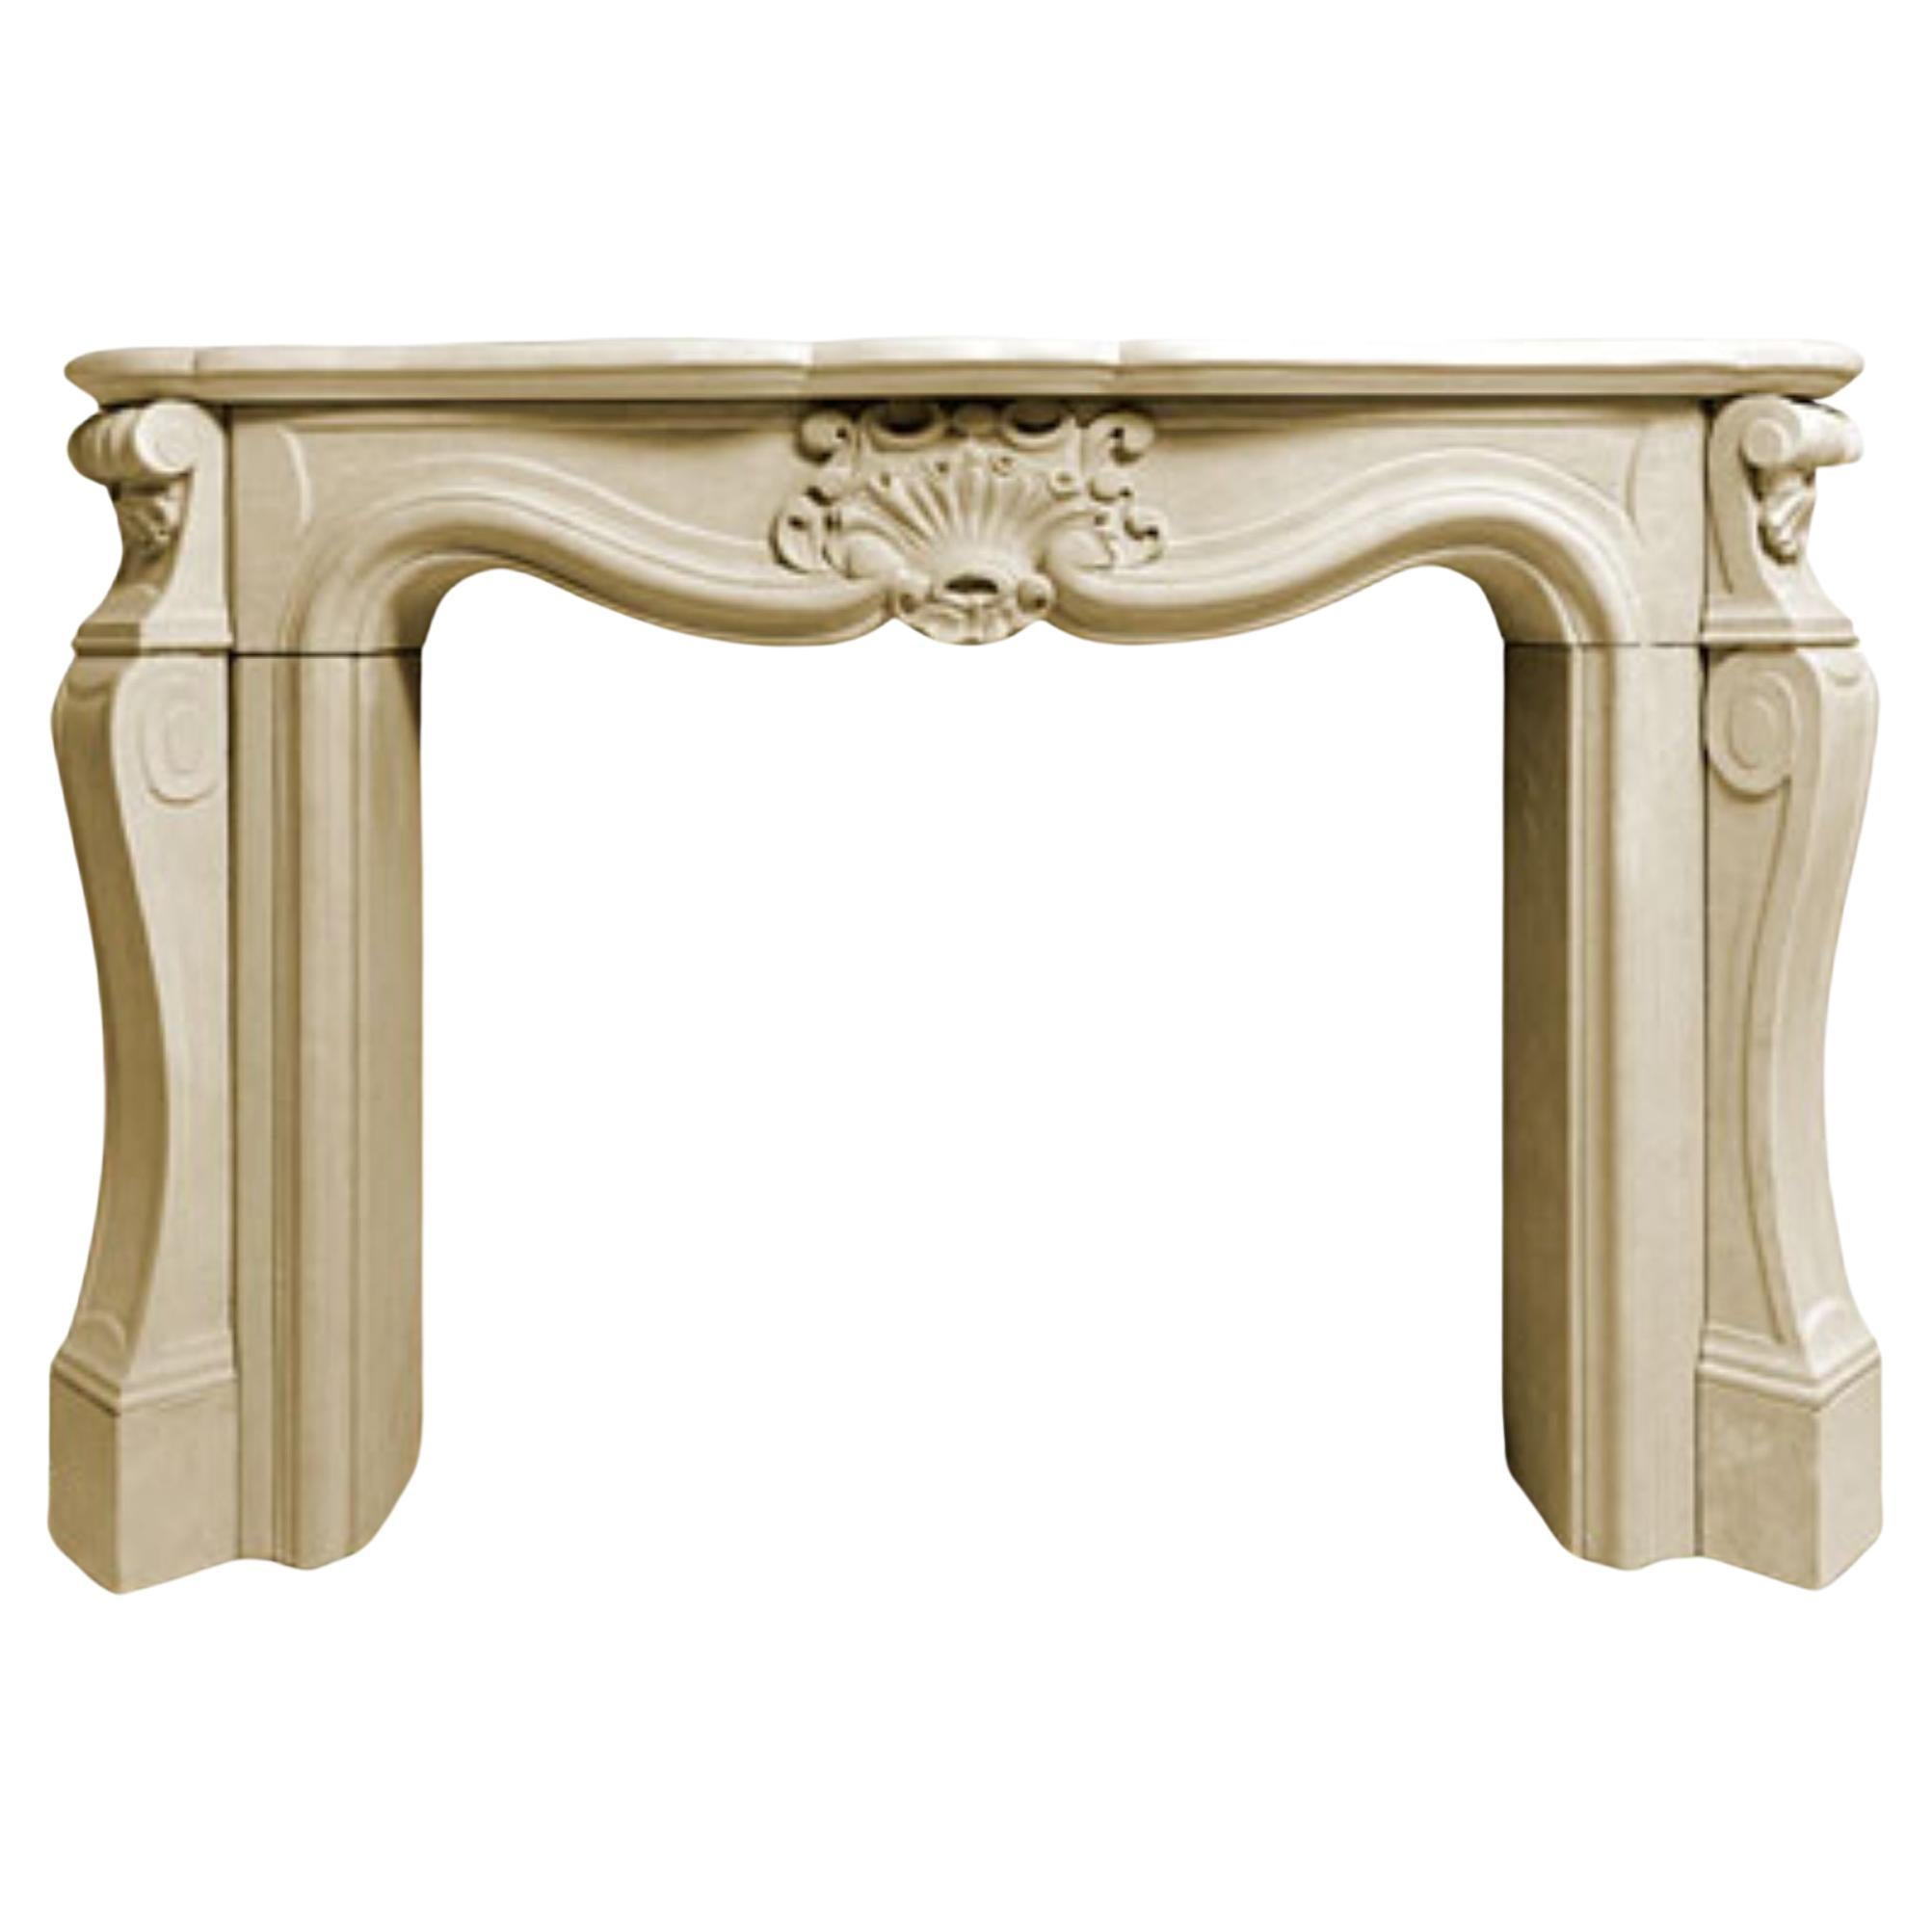 The Louis XV : The Classic French Stone Fireplace Evoking the Era of King Louis XV (en anglais)